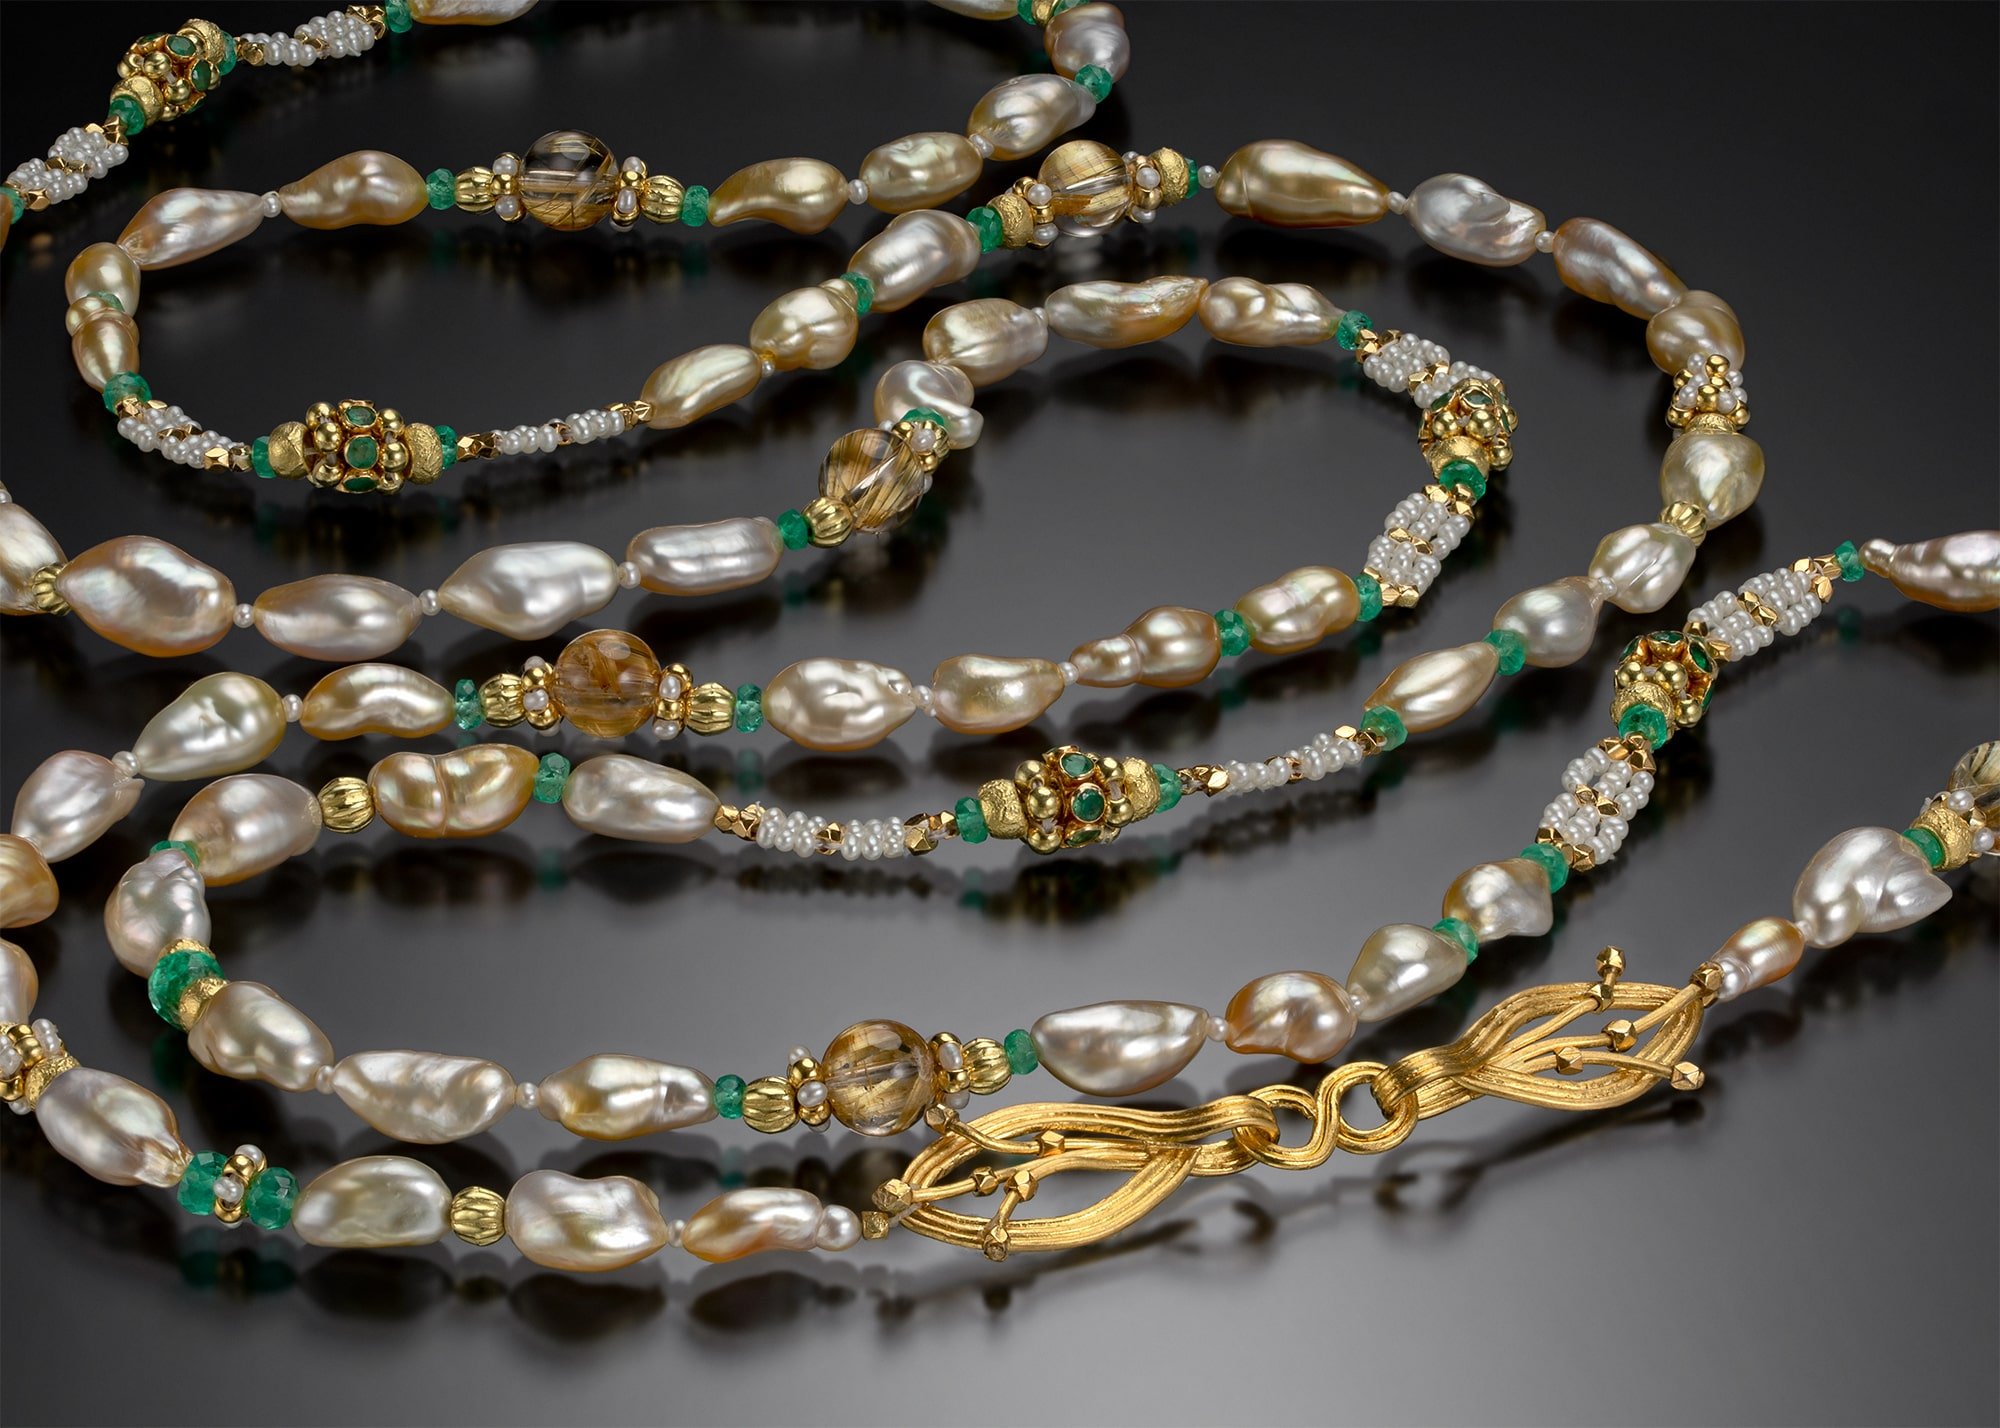 South Sea Keshi.   This long necklace is woven of South Sea keshi pearls, emeralds, tiny seed pearls, 20k and 18k gold; the clasp is hand fabricated out of 22k gold. (48 inches long)